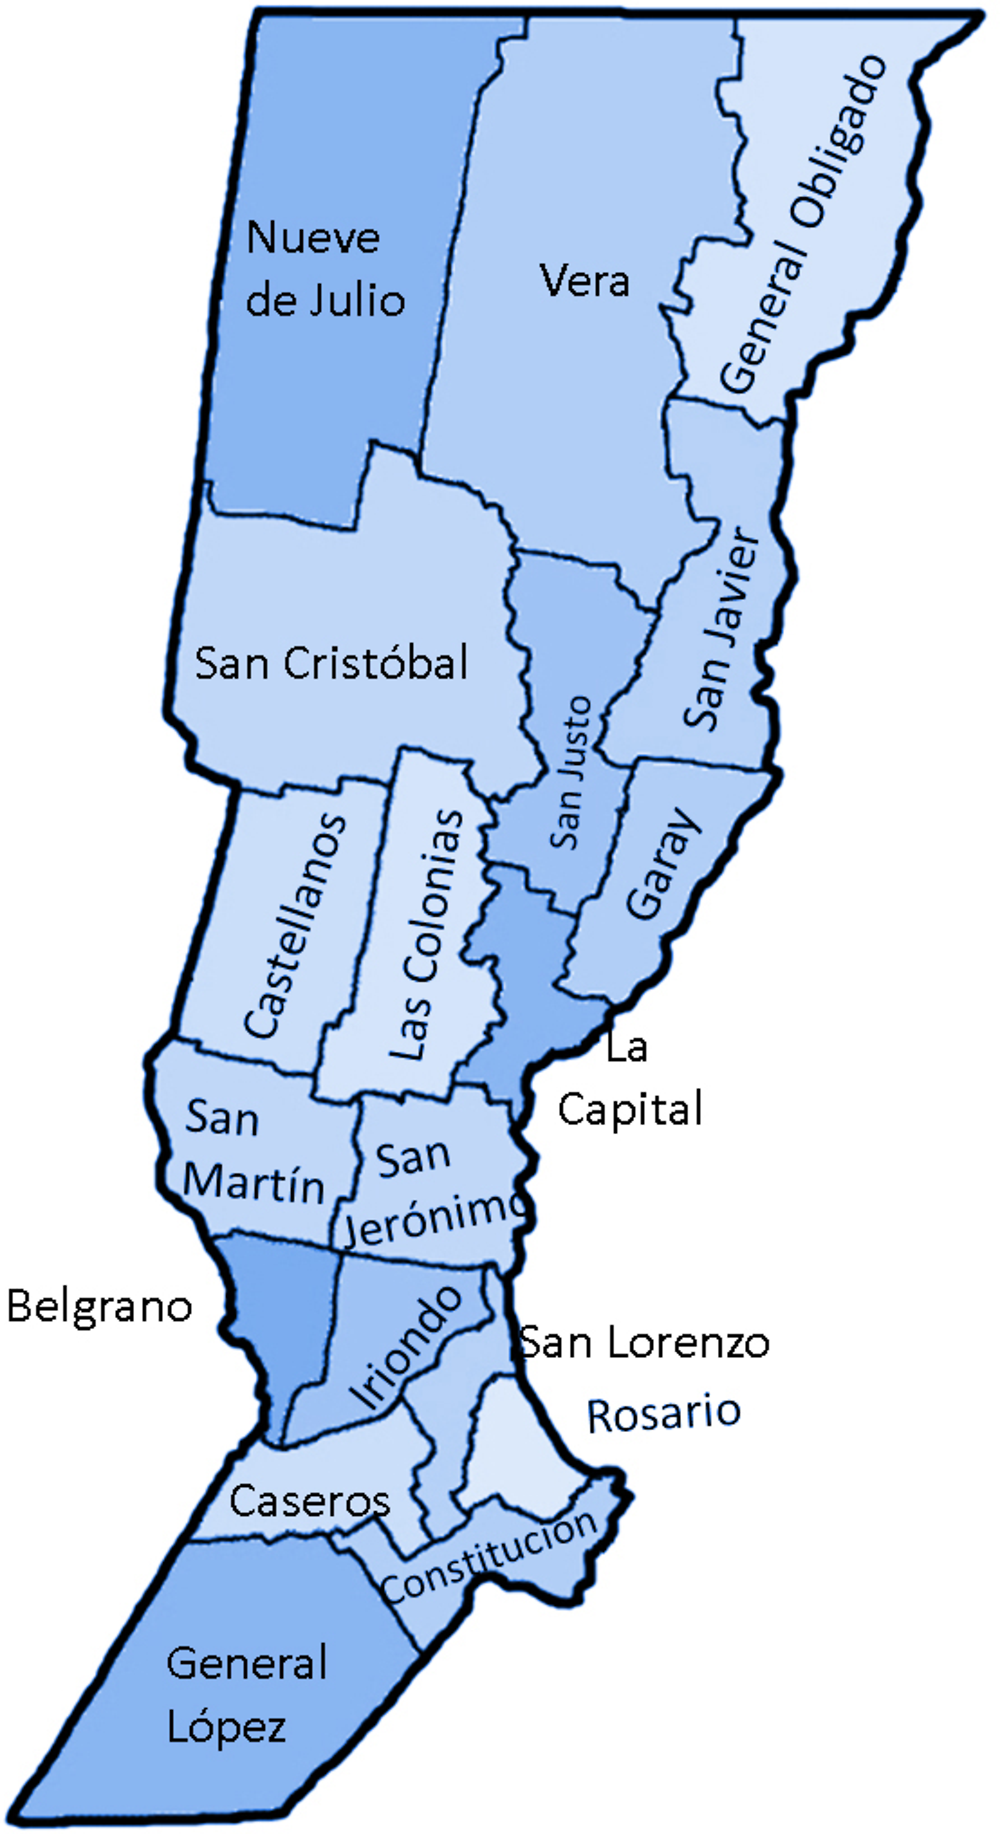 Figure 4.B.1. Province of Santa Fe and departments